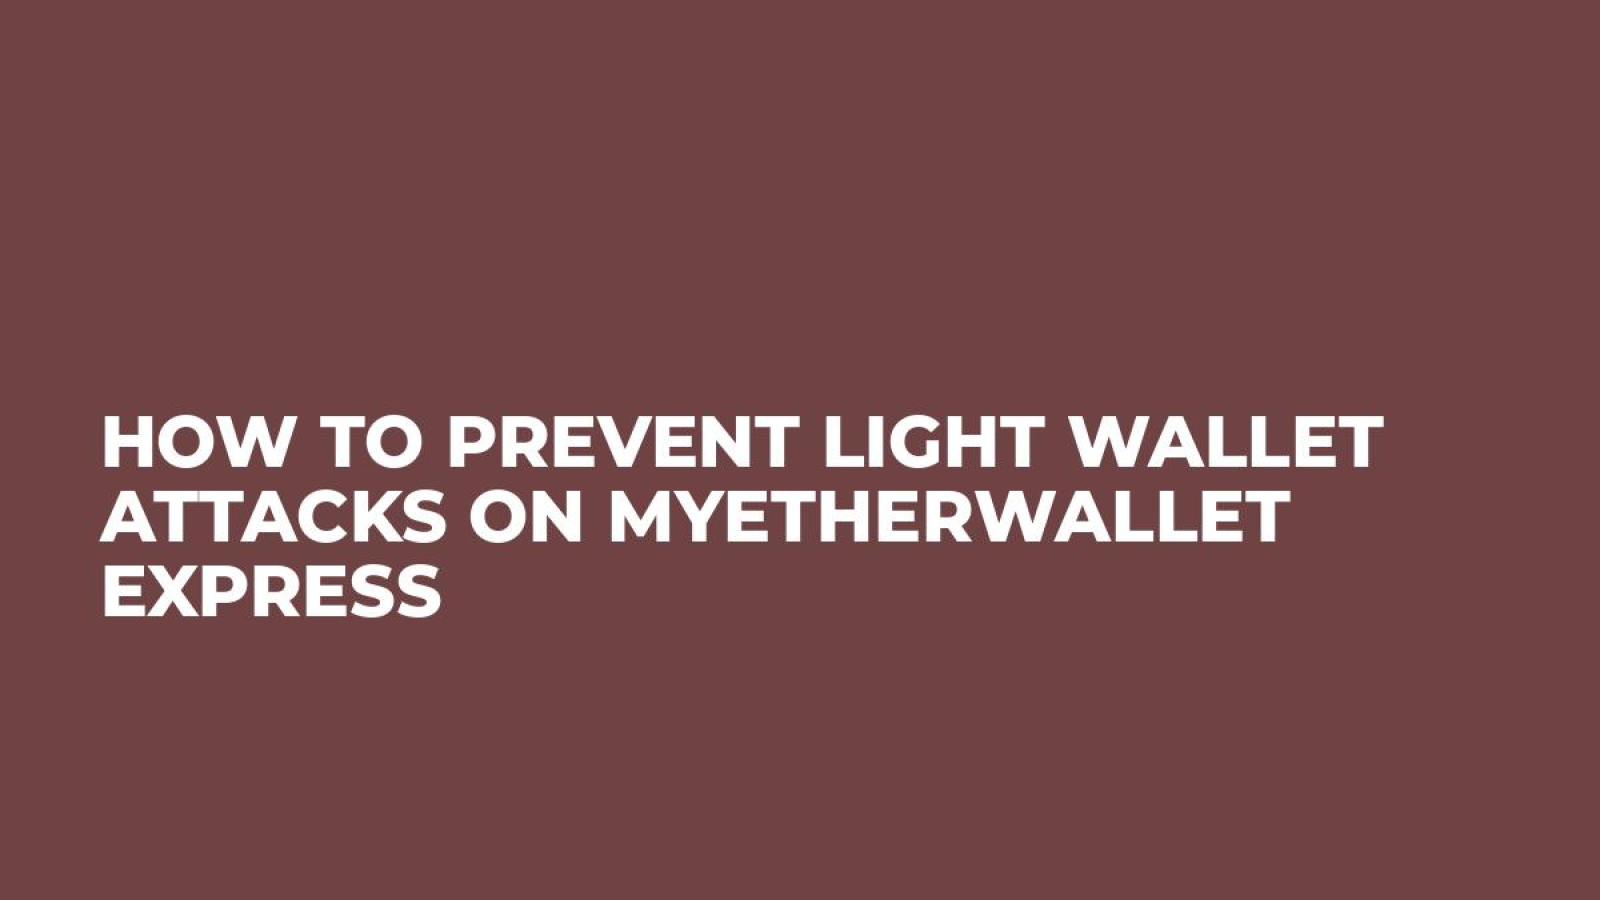 How to Prevent Light Wallet Attacks on MyEtherWallet Express